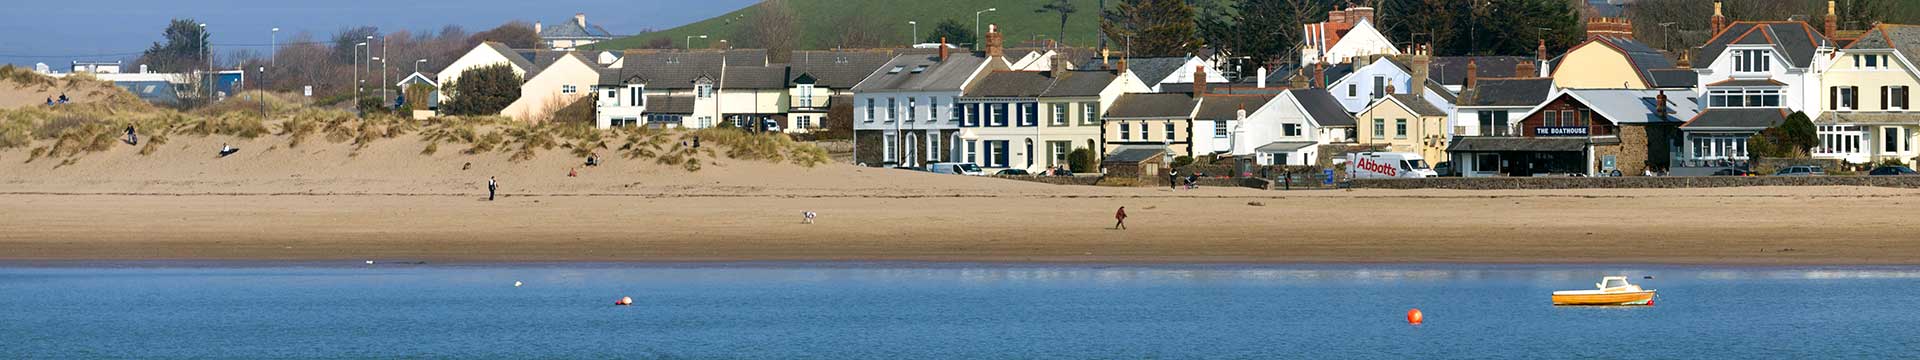 Instow Cottages